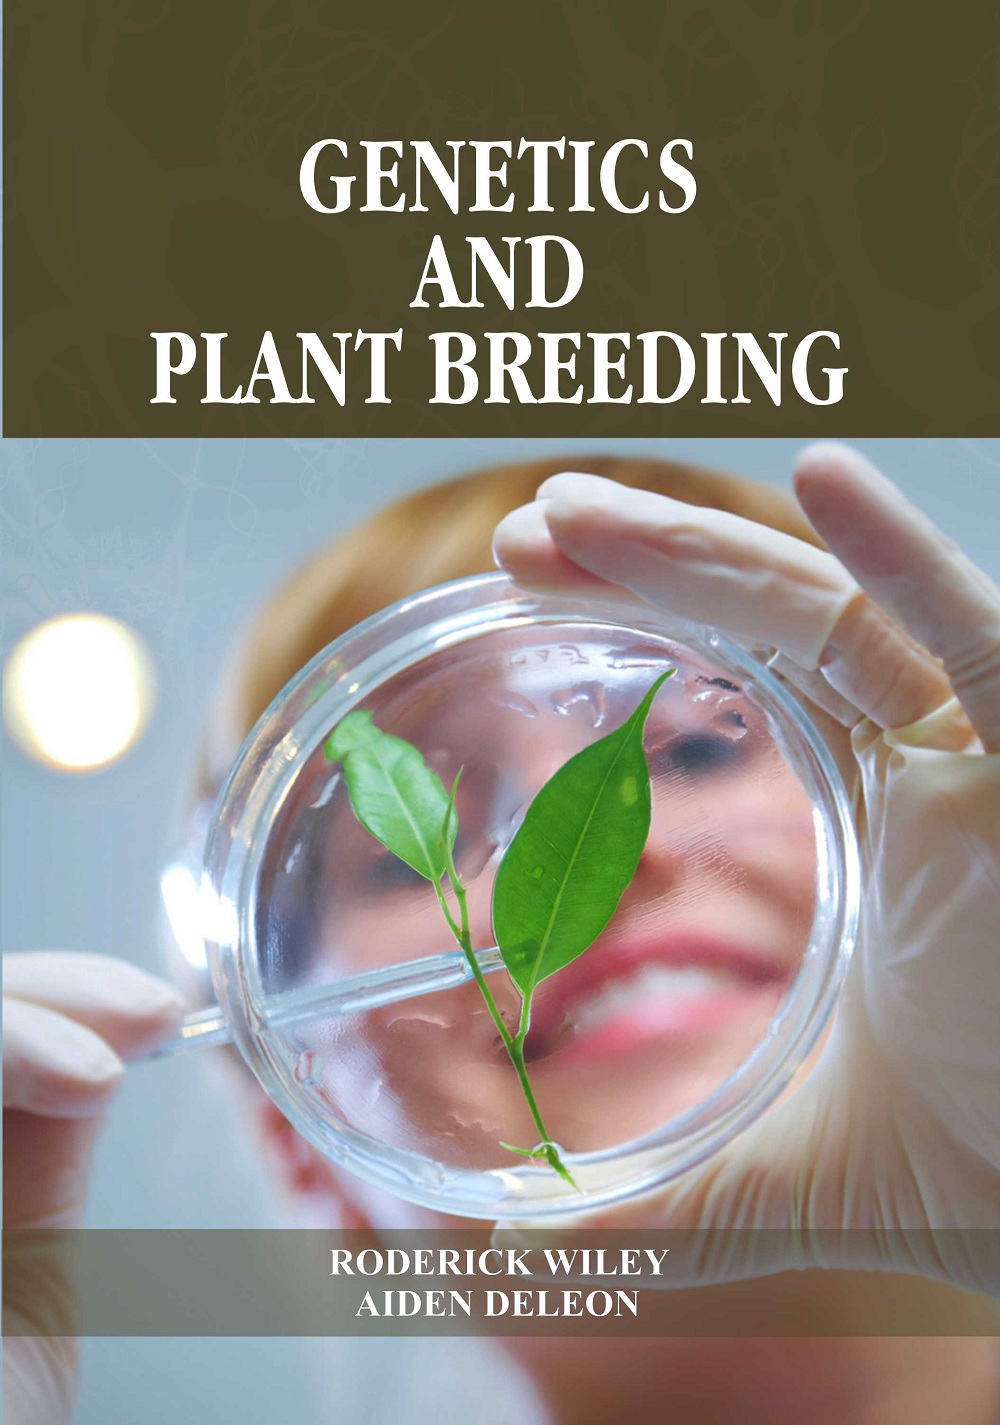 research paper on plant breeding